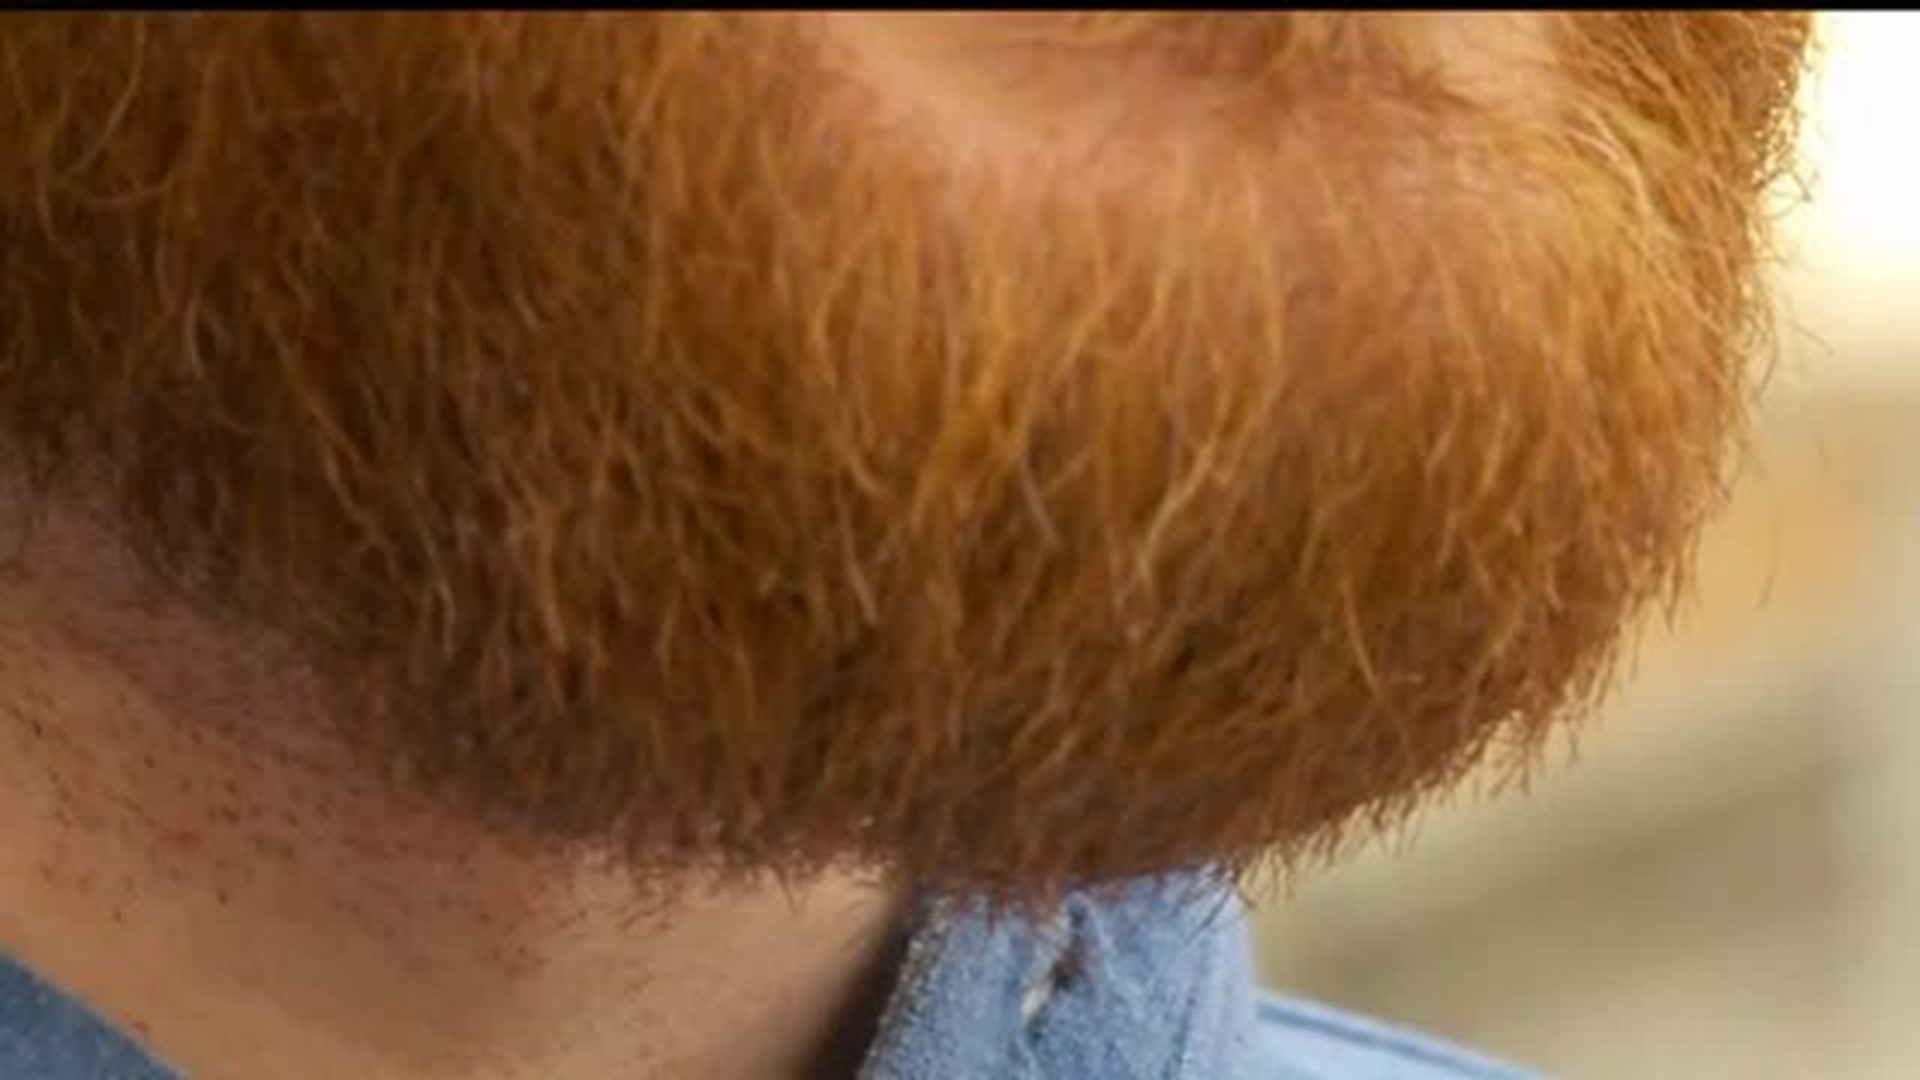 Local reaction: College students protest over university`s beard ban